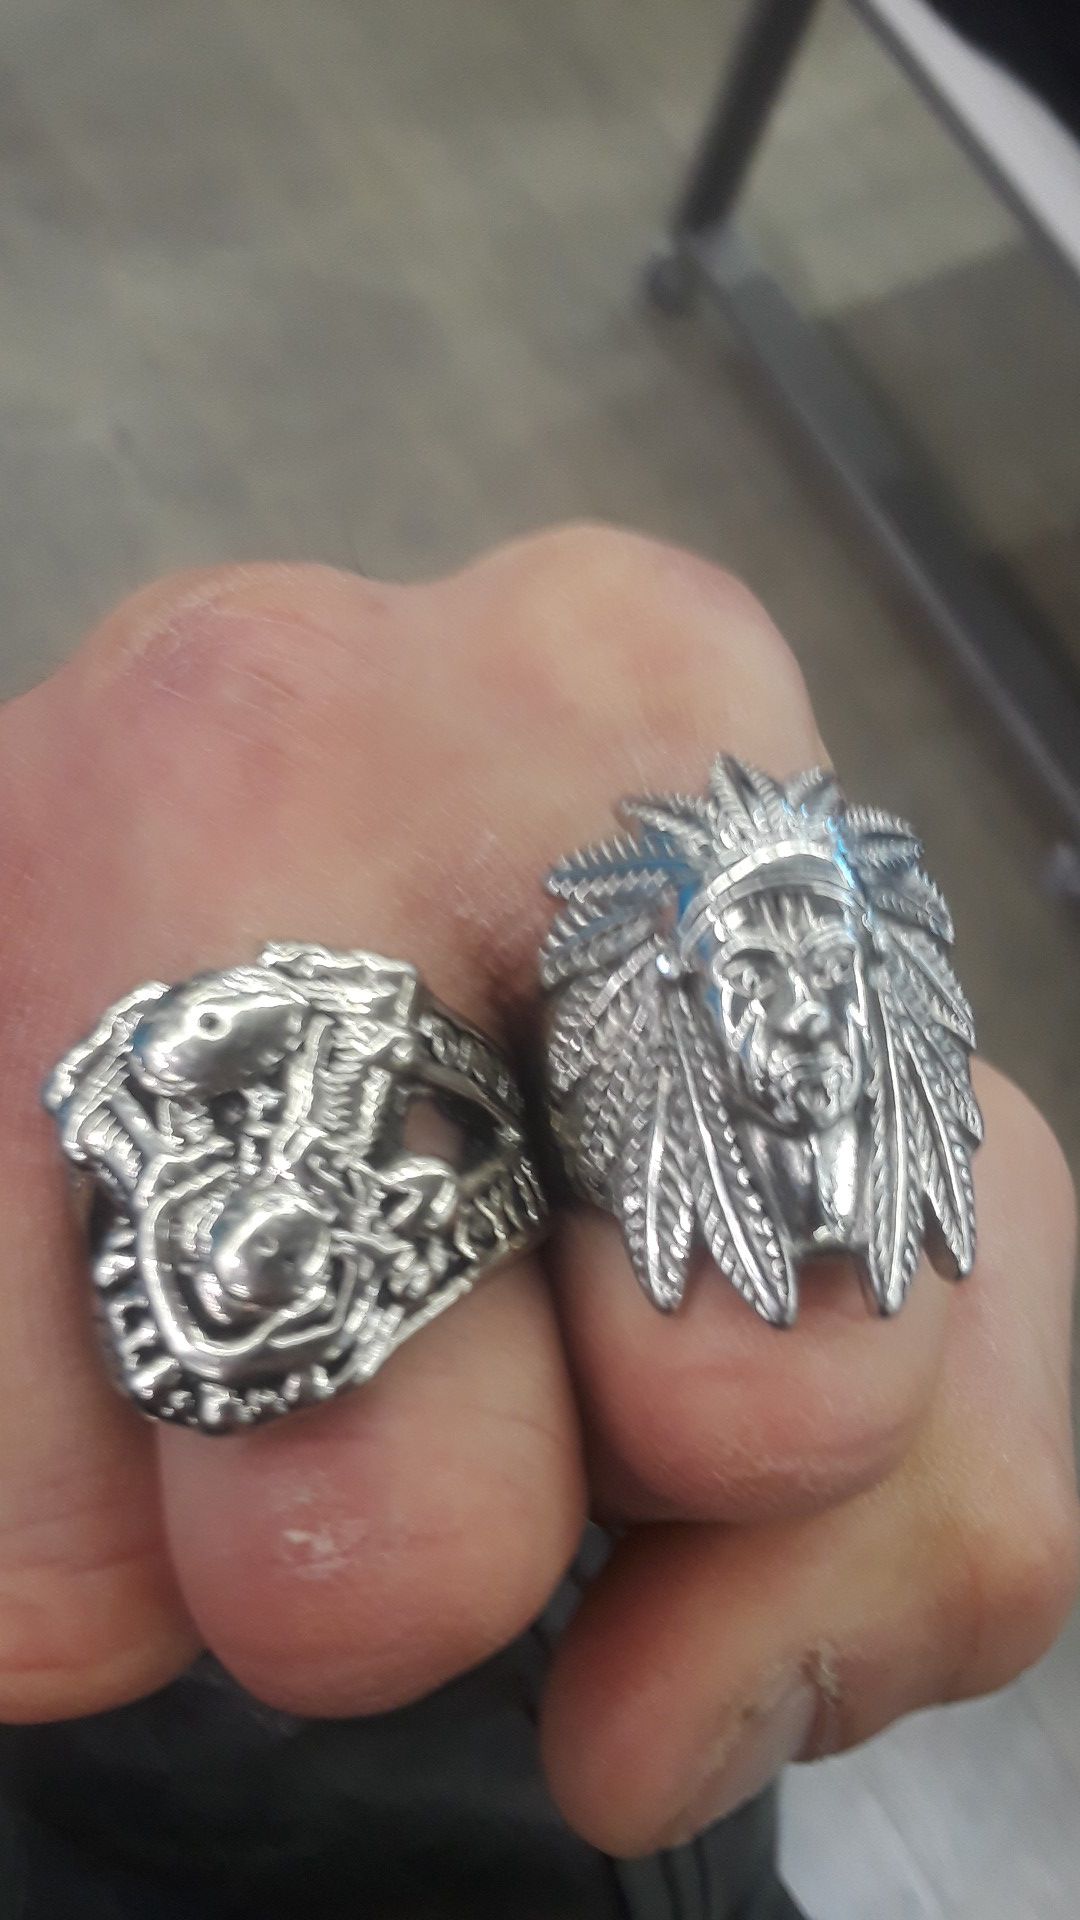 STAINLESS STEEL HARLEY DAVIDSON RING AND INDIAN HEAD RING